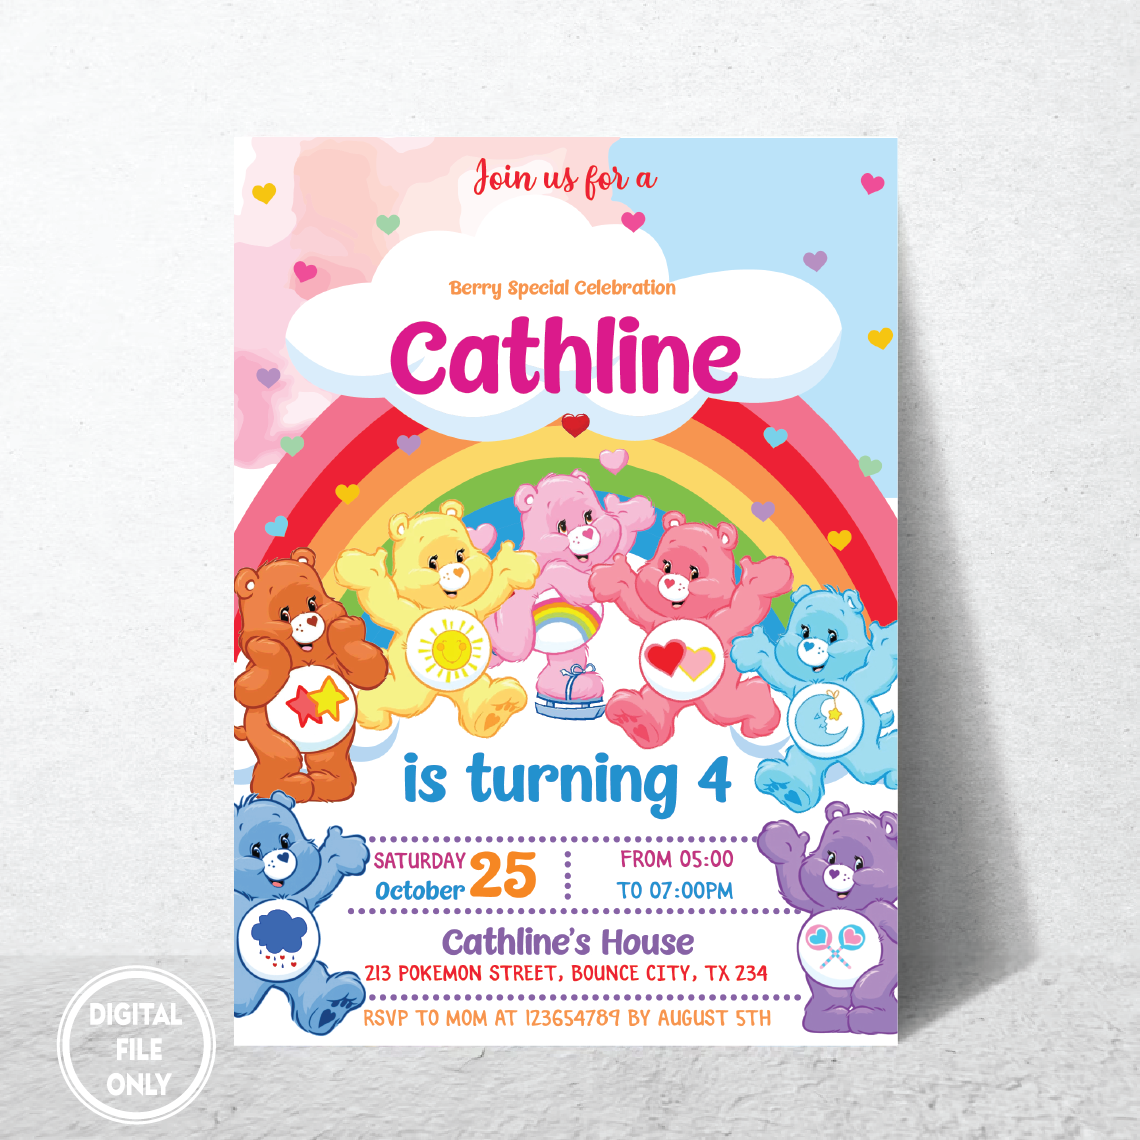 Personalized File Care Bear Invitation Birthday Party Invitation, Bears Invitation Digital Invitation, Birthday Invite, Instant Download, PNG File Only